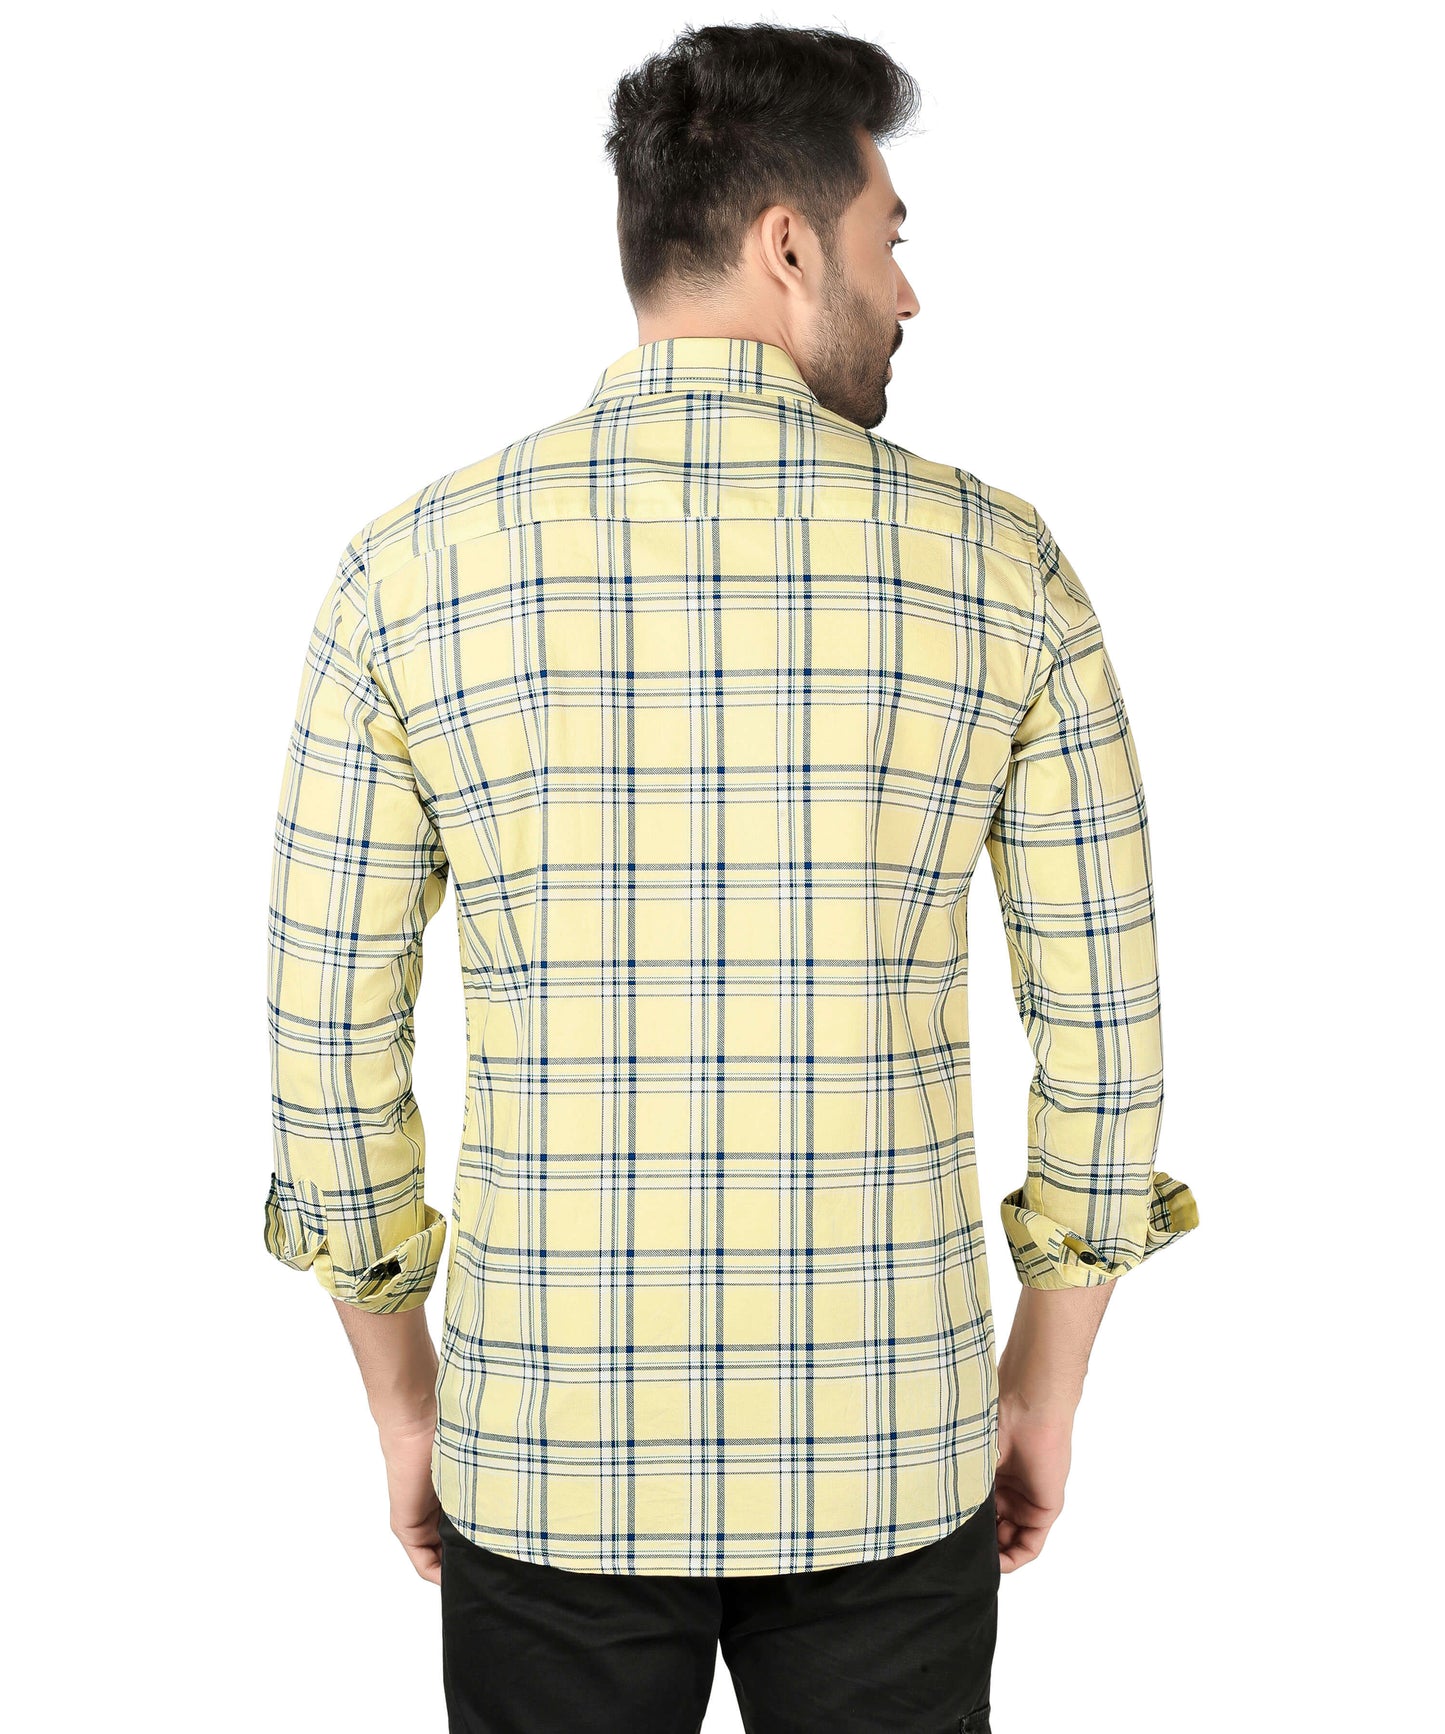 5thanfold Men's Casual Pure Cotton Full Sleeve Checkered Yellow Slim Fit Shirt